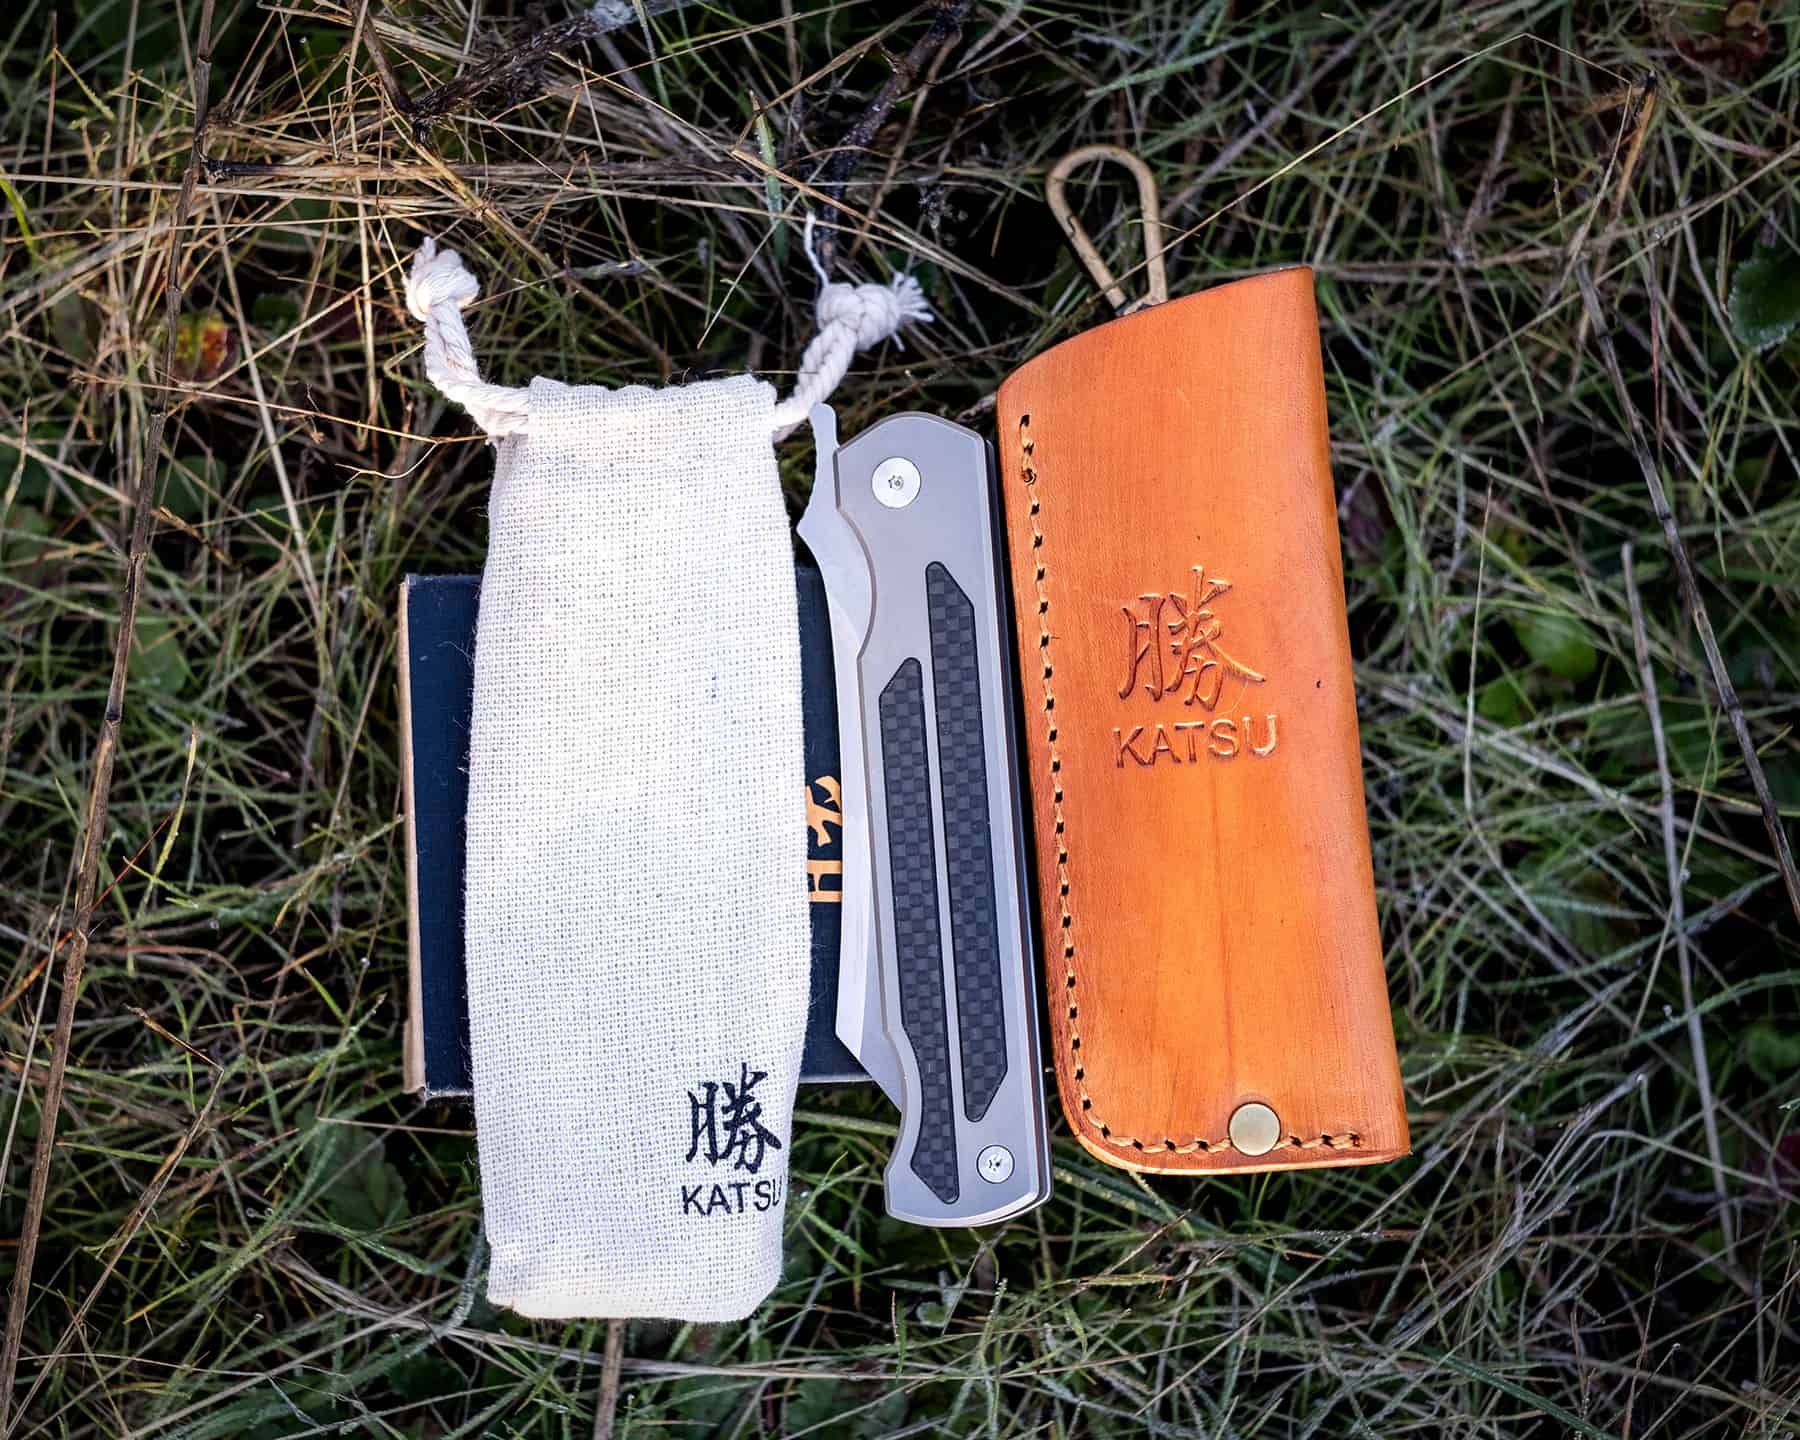 The katsu JT01 Titanium Camping Knife ships with a lot of packaging and accessories. This makes it a decent gift option.